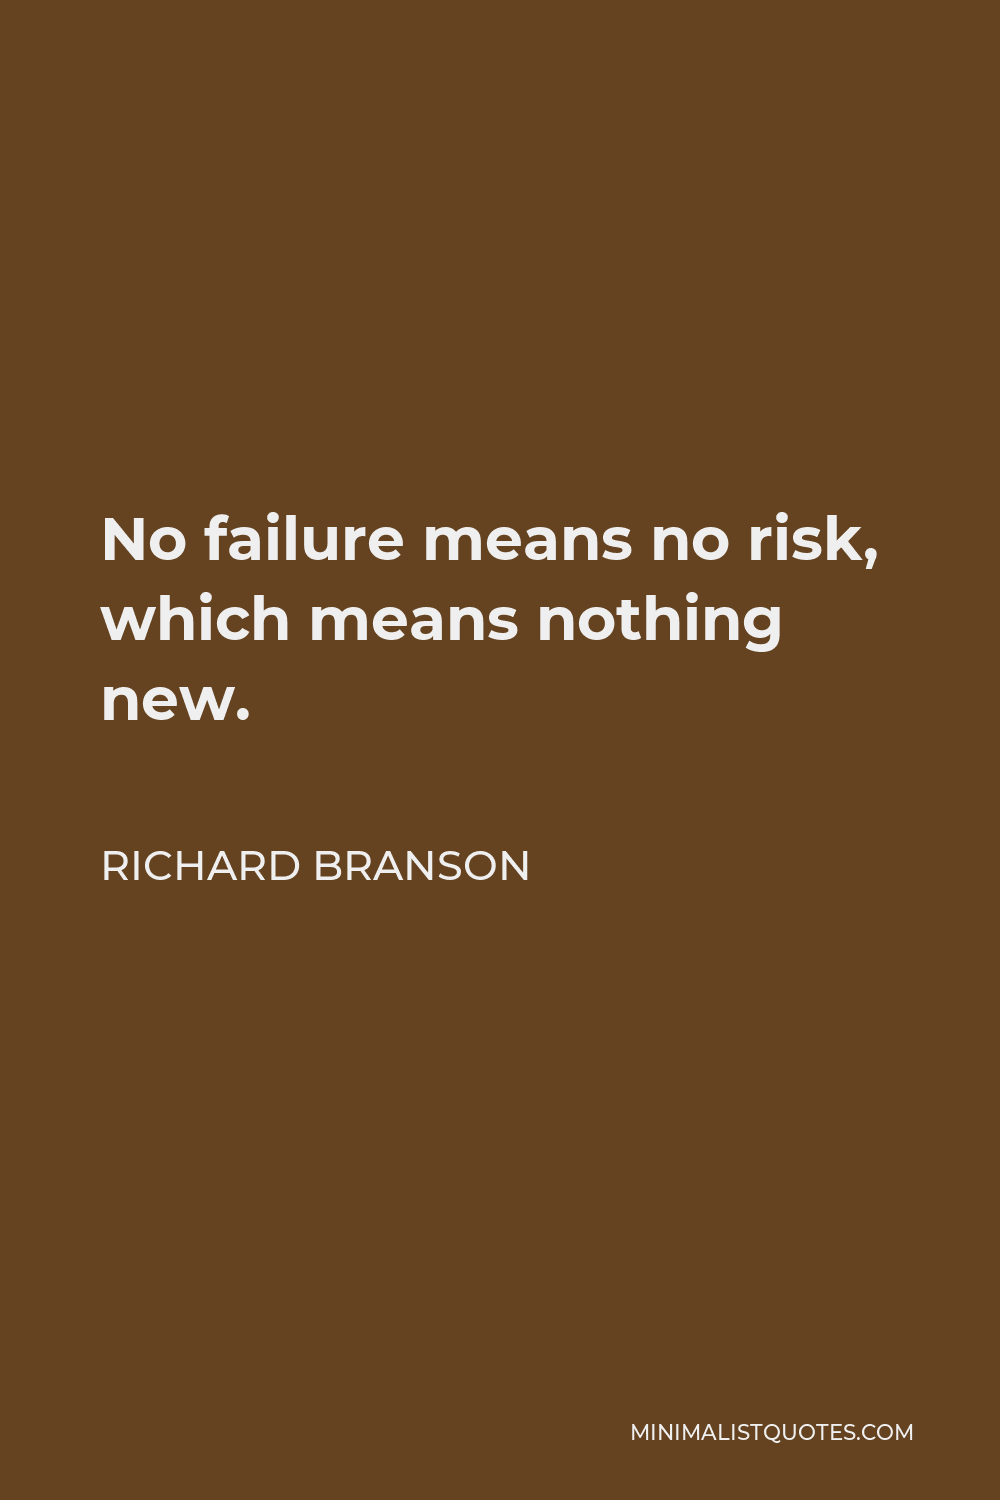 Richard Branson Quote - No failure means no risk, which means nothing new.